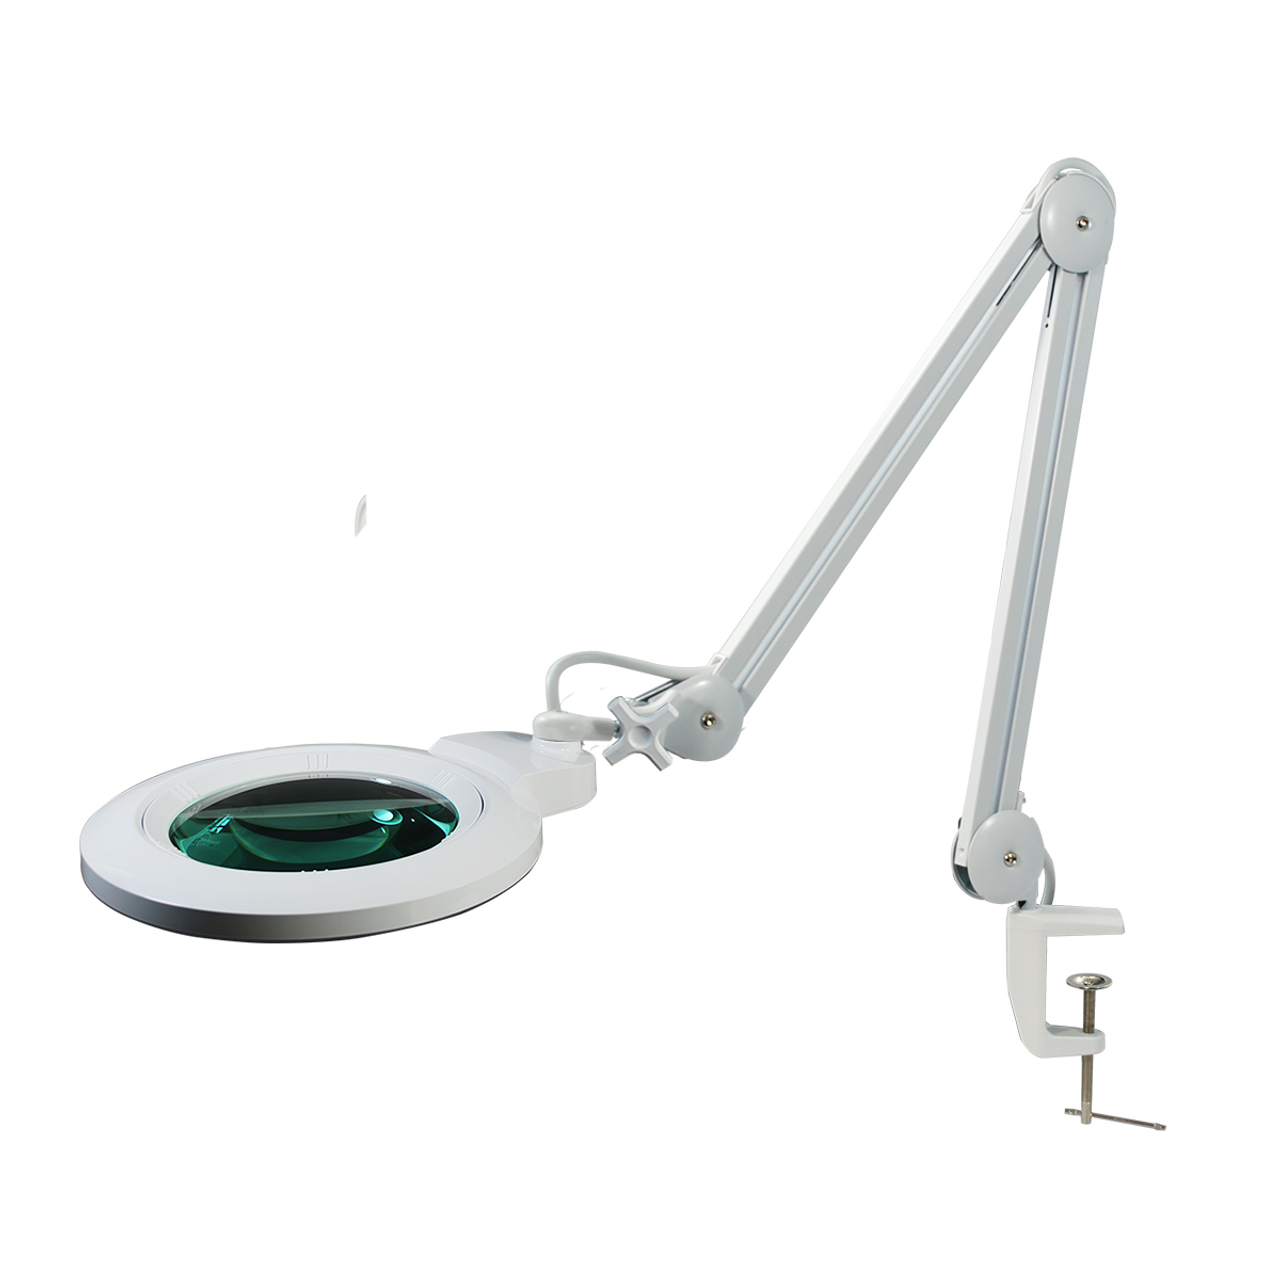 SMD LED Magnifying Lamp with Clamp, 3 Diopter, 7 in. Lens